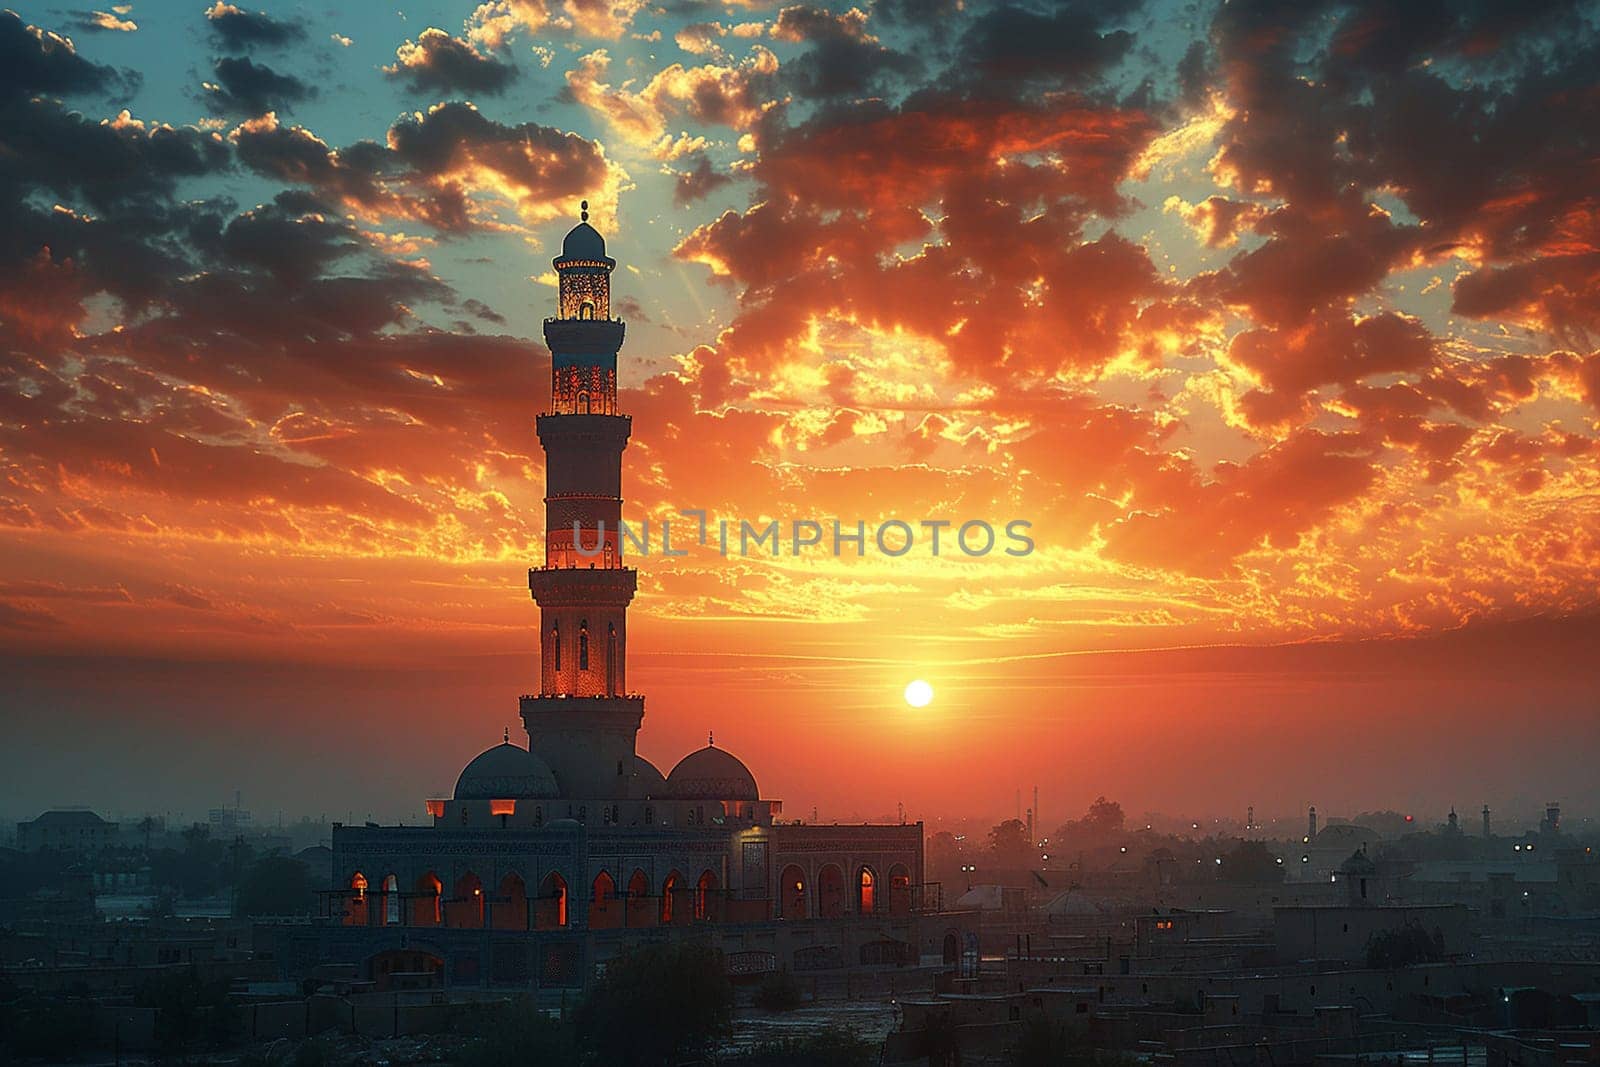 Islamic Minaret Towering Above a Historic City, The tower's silhouette merges with the sky, calling the faithful to prayer.